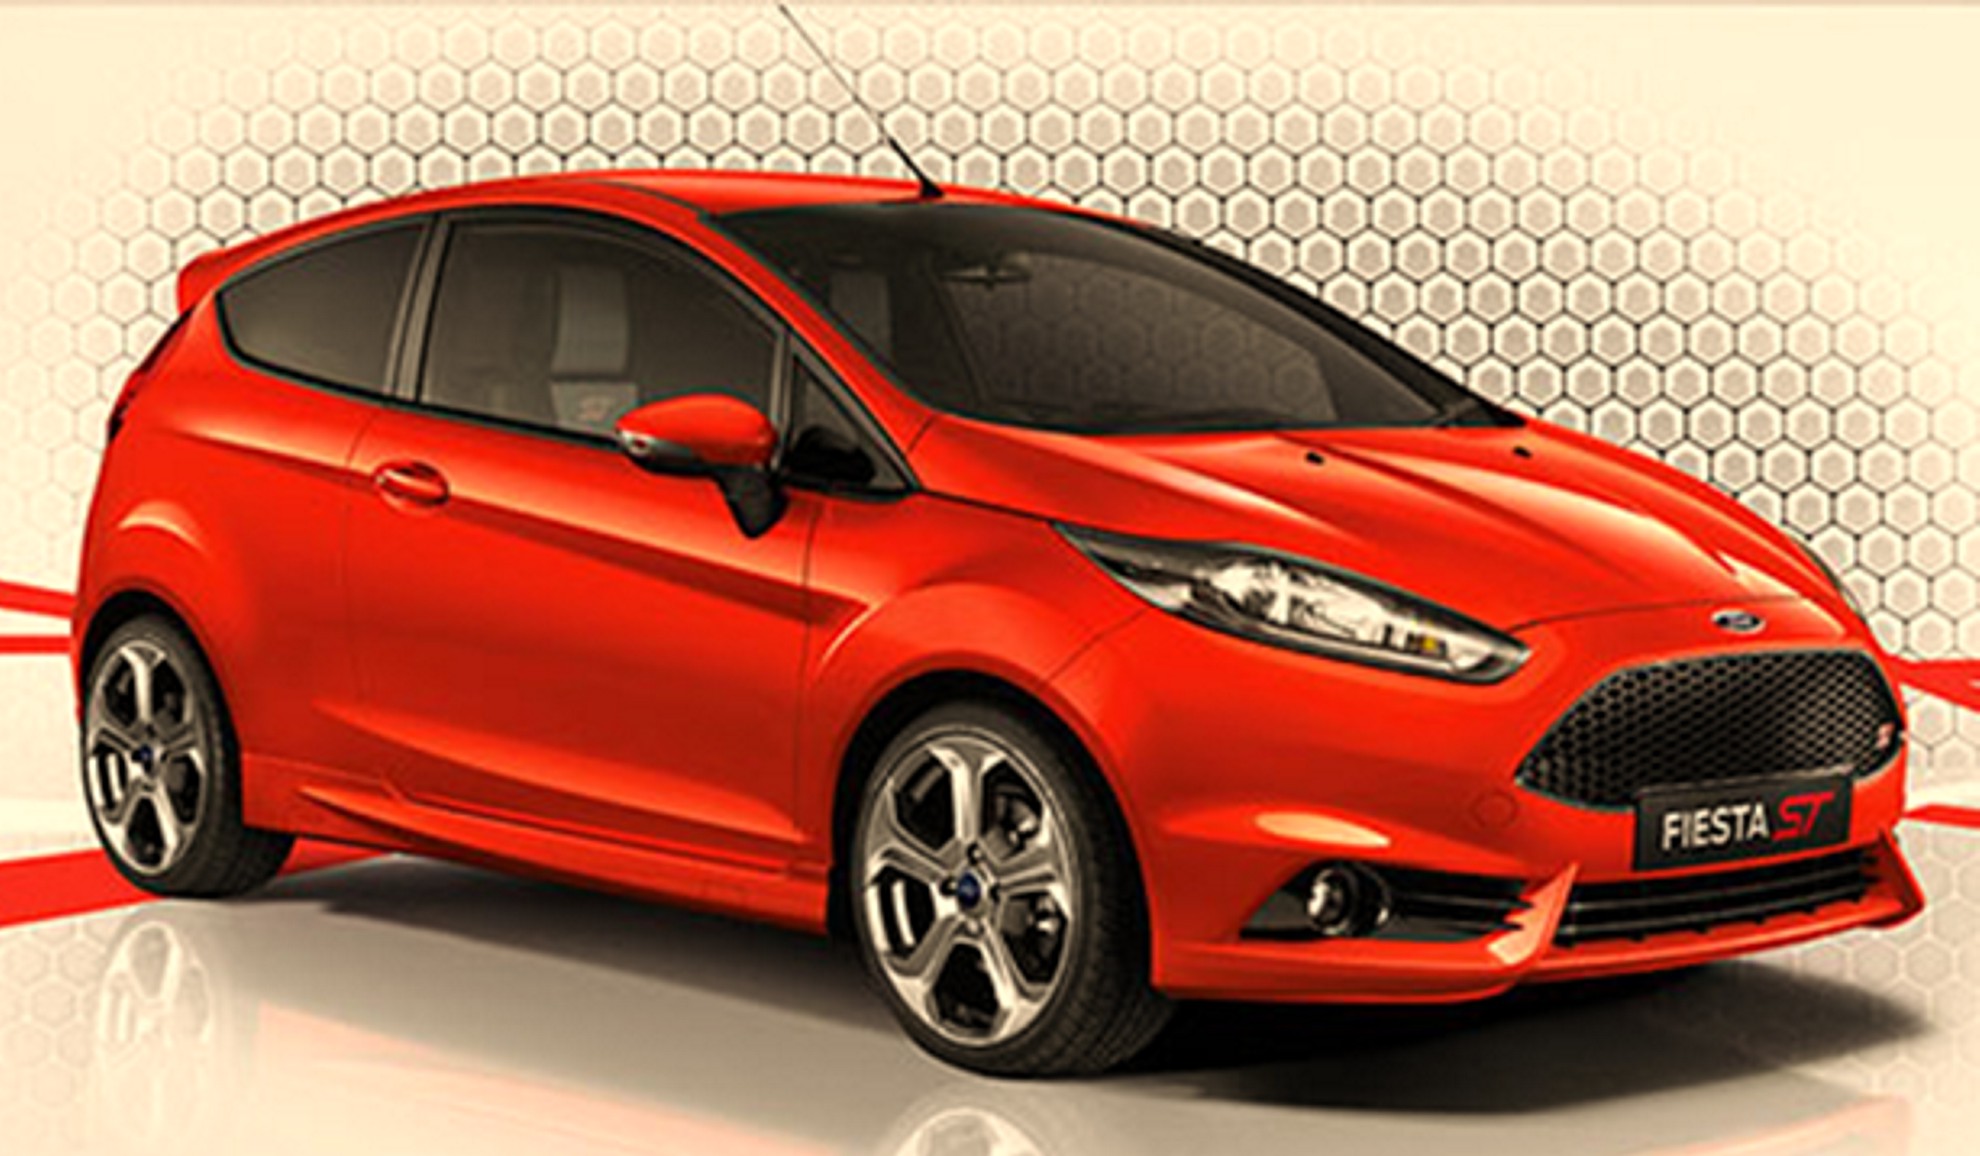 FORD FIESTA REMAINS AT THE TOP OF THE COST-CONSCIOUS MOTORIST’S WISH LIST